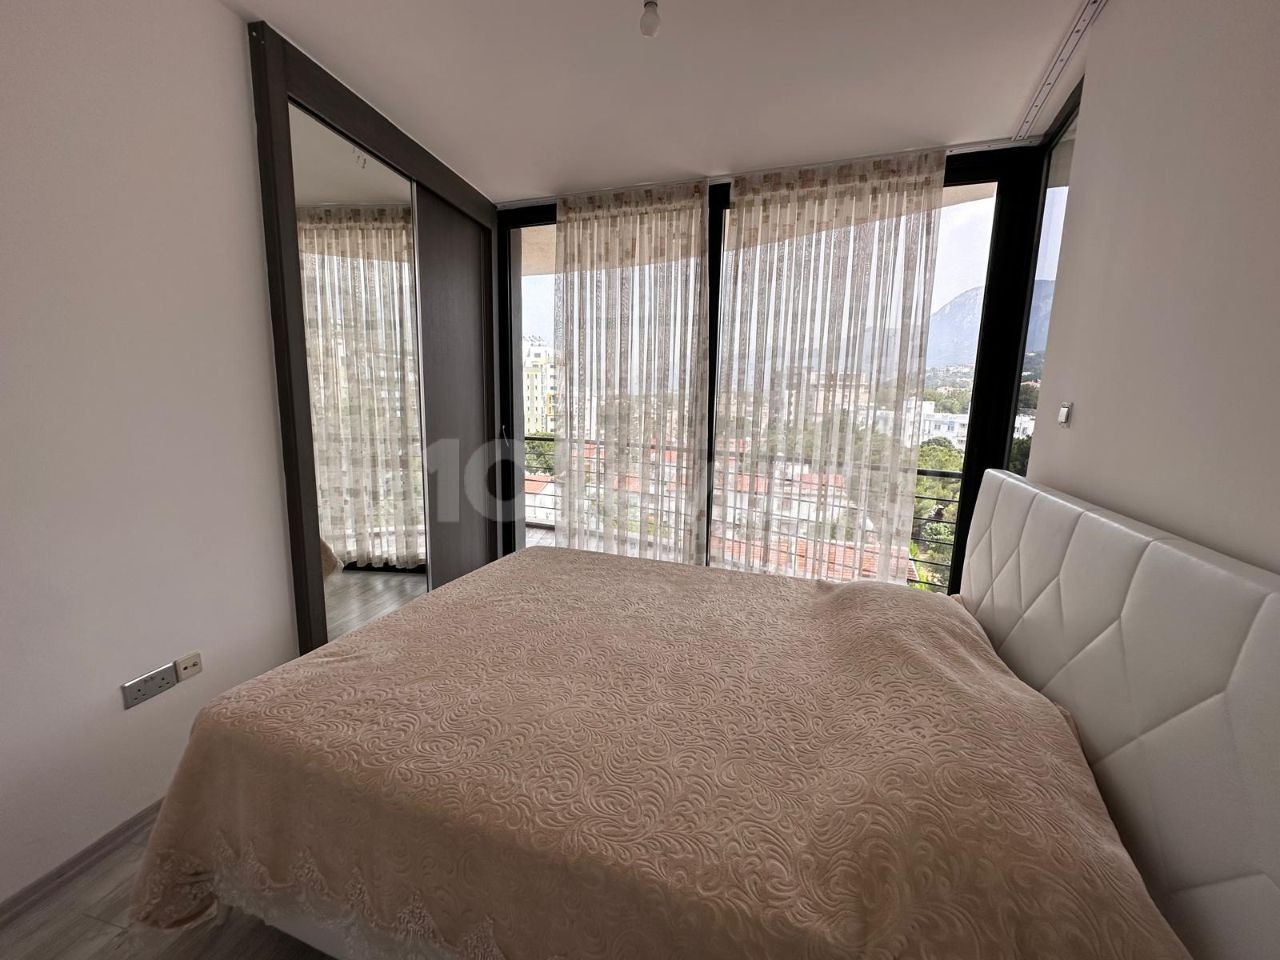 2+1 FULLY FURNISHED FLAT FOR RENT IN KYRENIA, WITH MOUNTAIN AND SEA VIEWS.